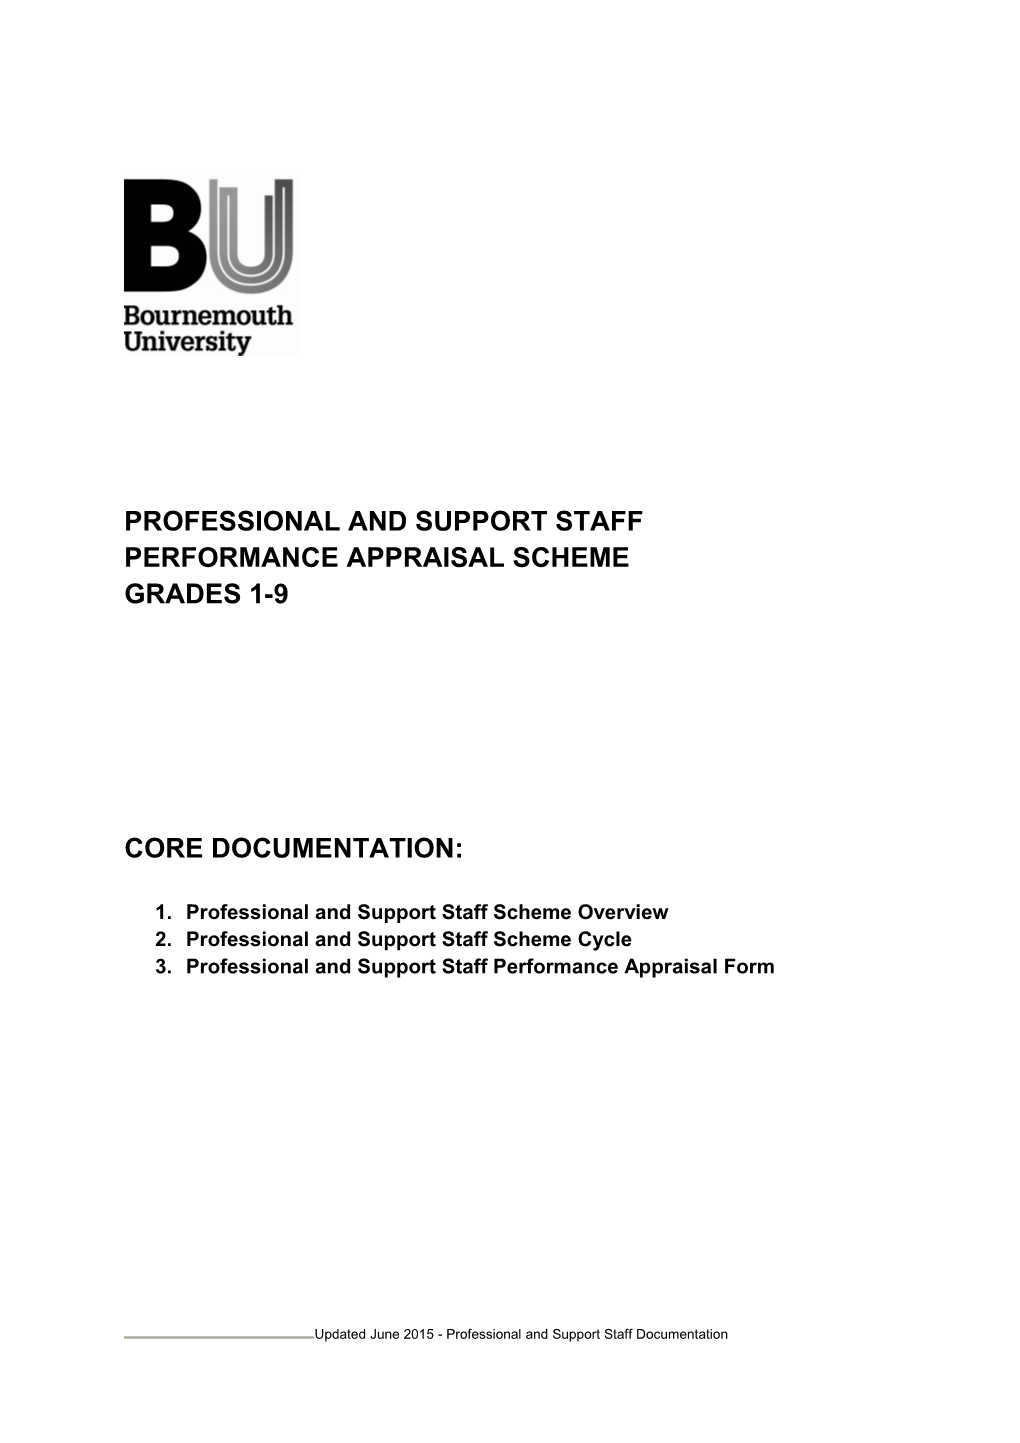 Professional and Support Staff Core Documentation